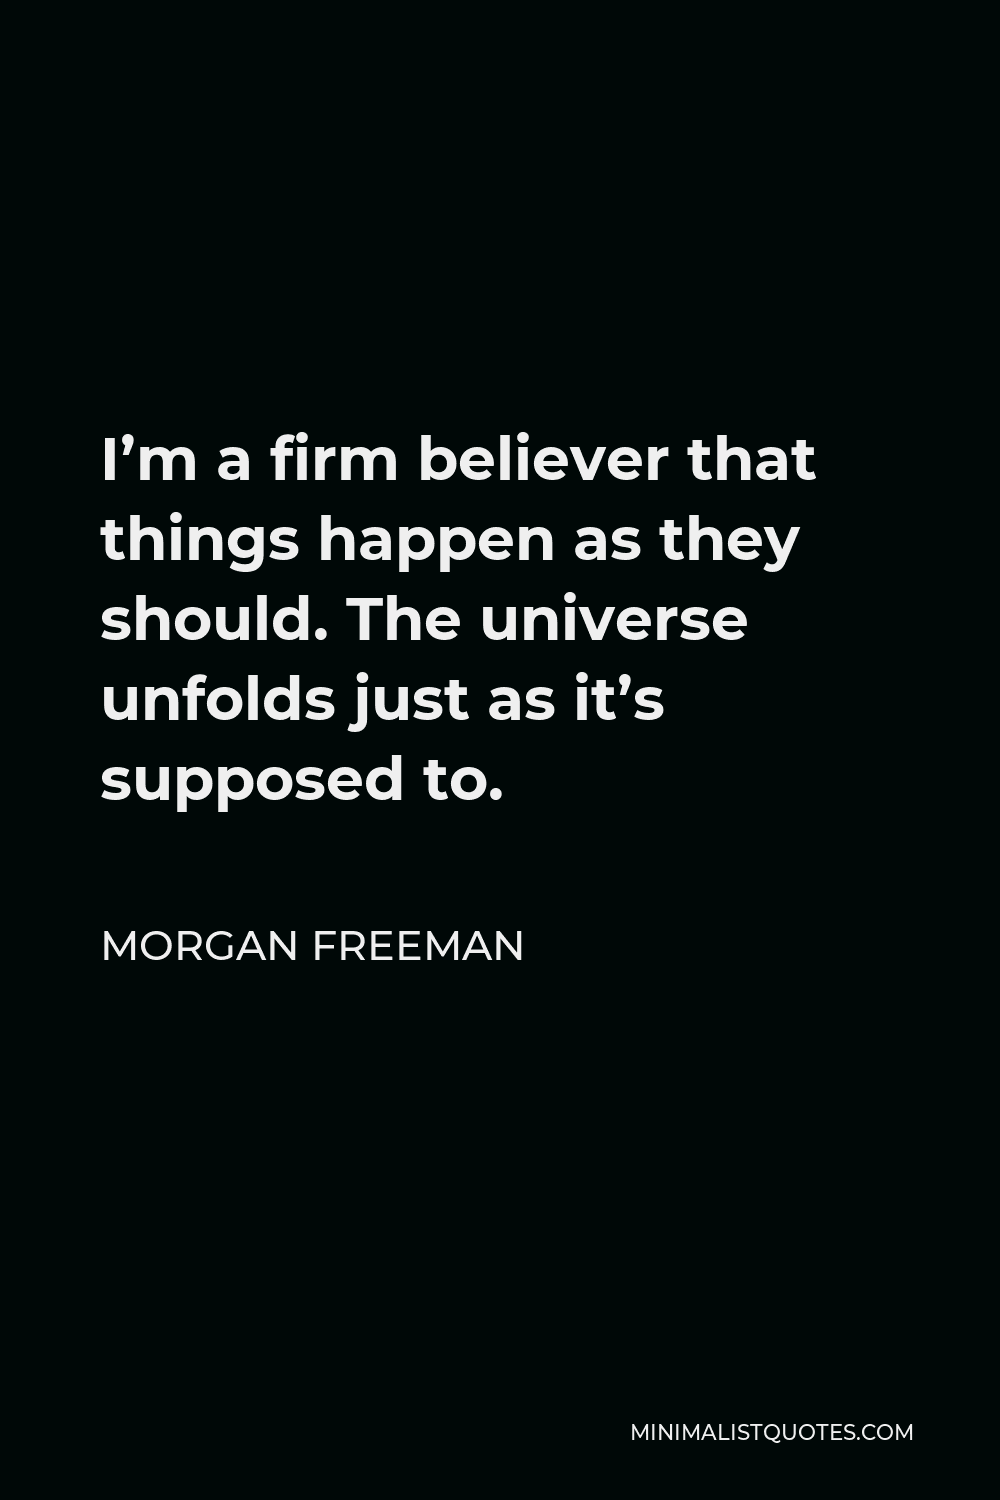 Morgan Freeman Quote: I'm a firm believer that things happen as they  should. The universe unfolds just as it's supposed to.